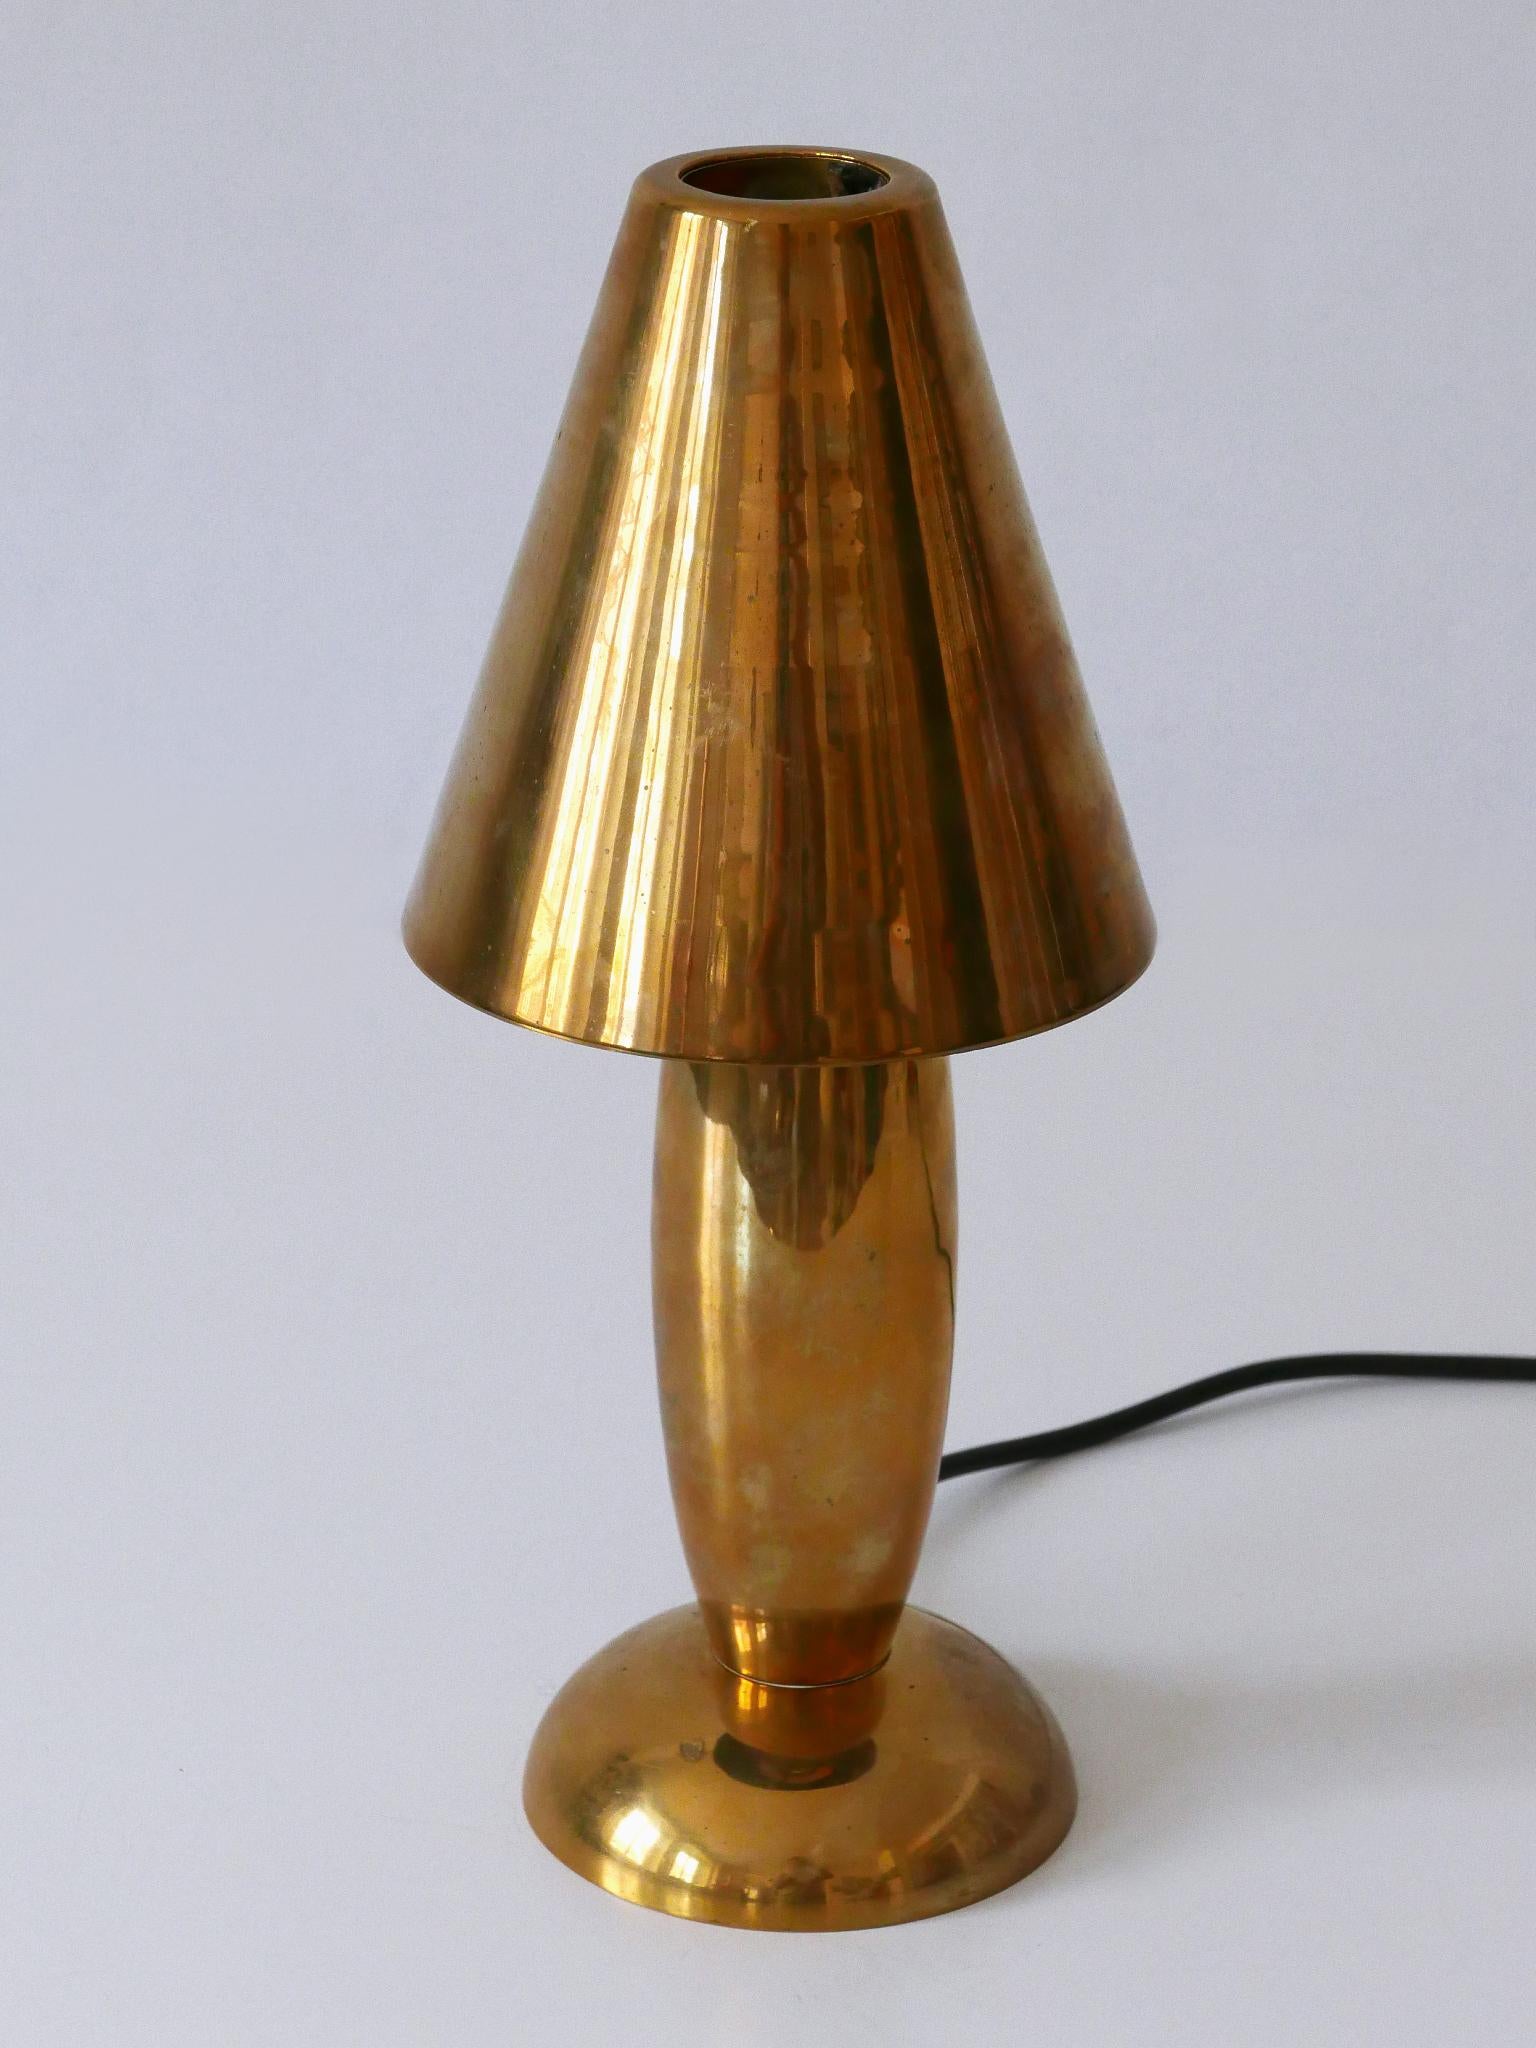 Rare & Lovely Mid-Century Modern Brass Side Table Lamp by Lambert Germany 1970s For Sale 3